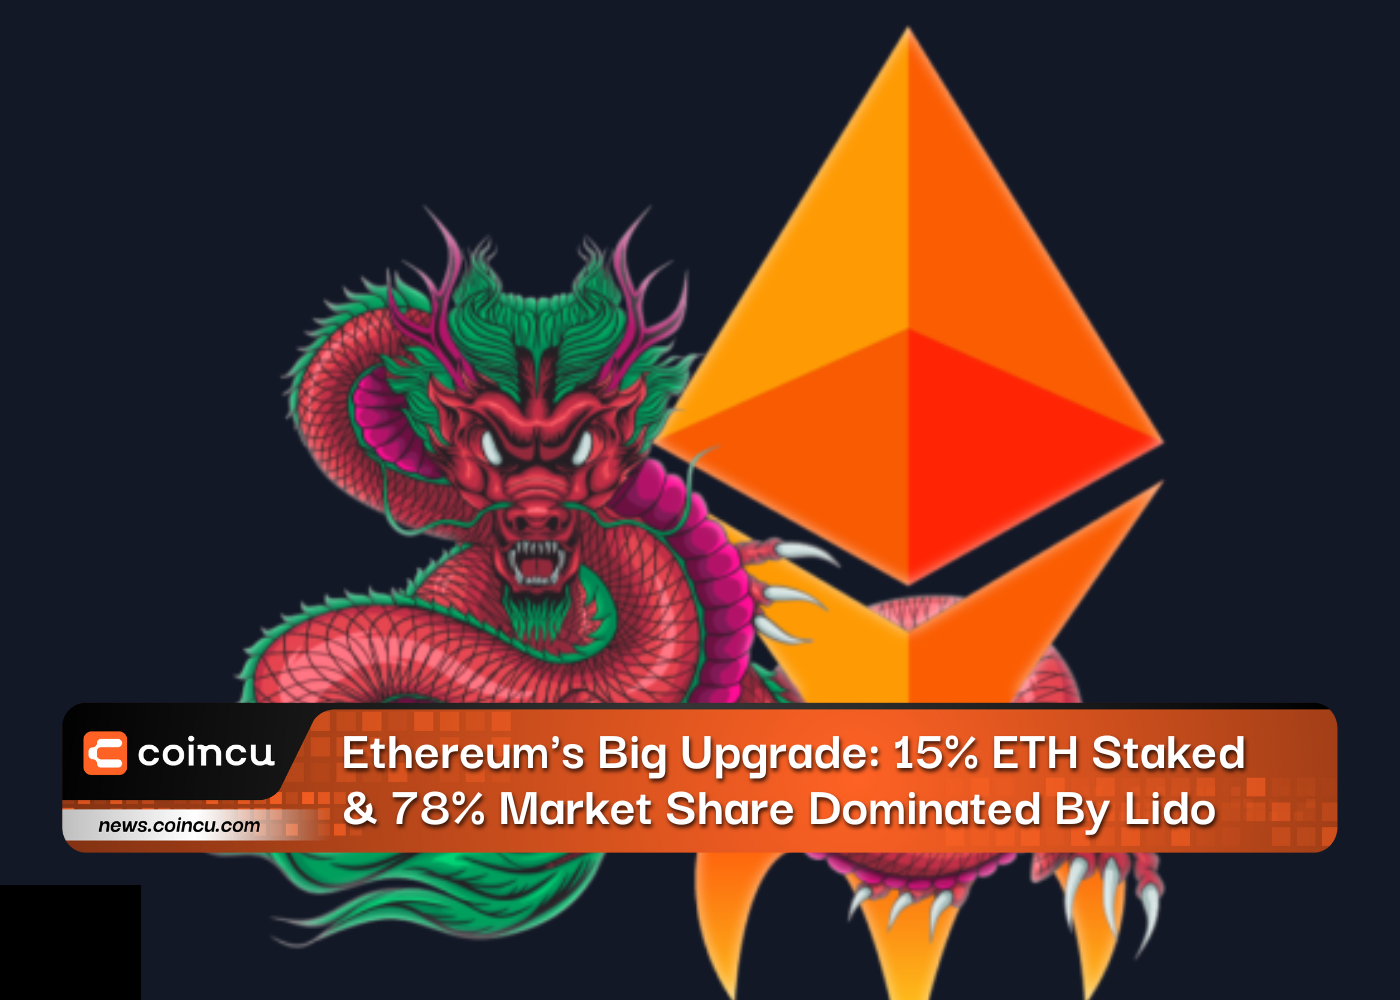 Ethereum's Big Upgrade: 15% ETH Staked & 78% Market Share Dominated By Lido